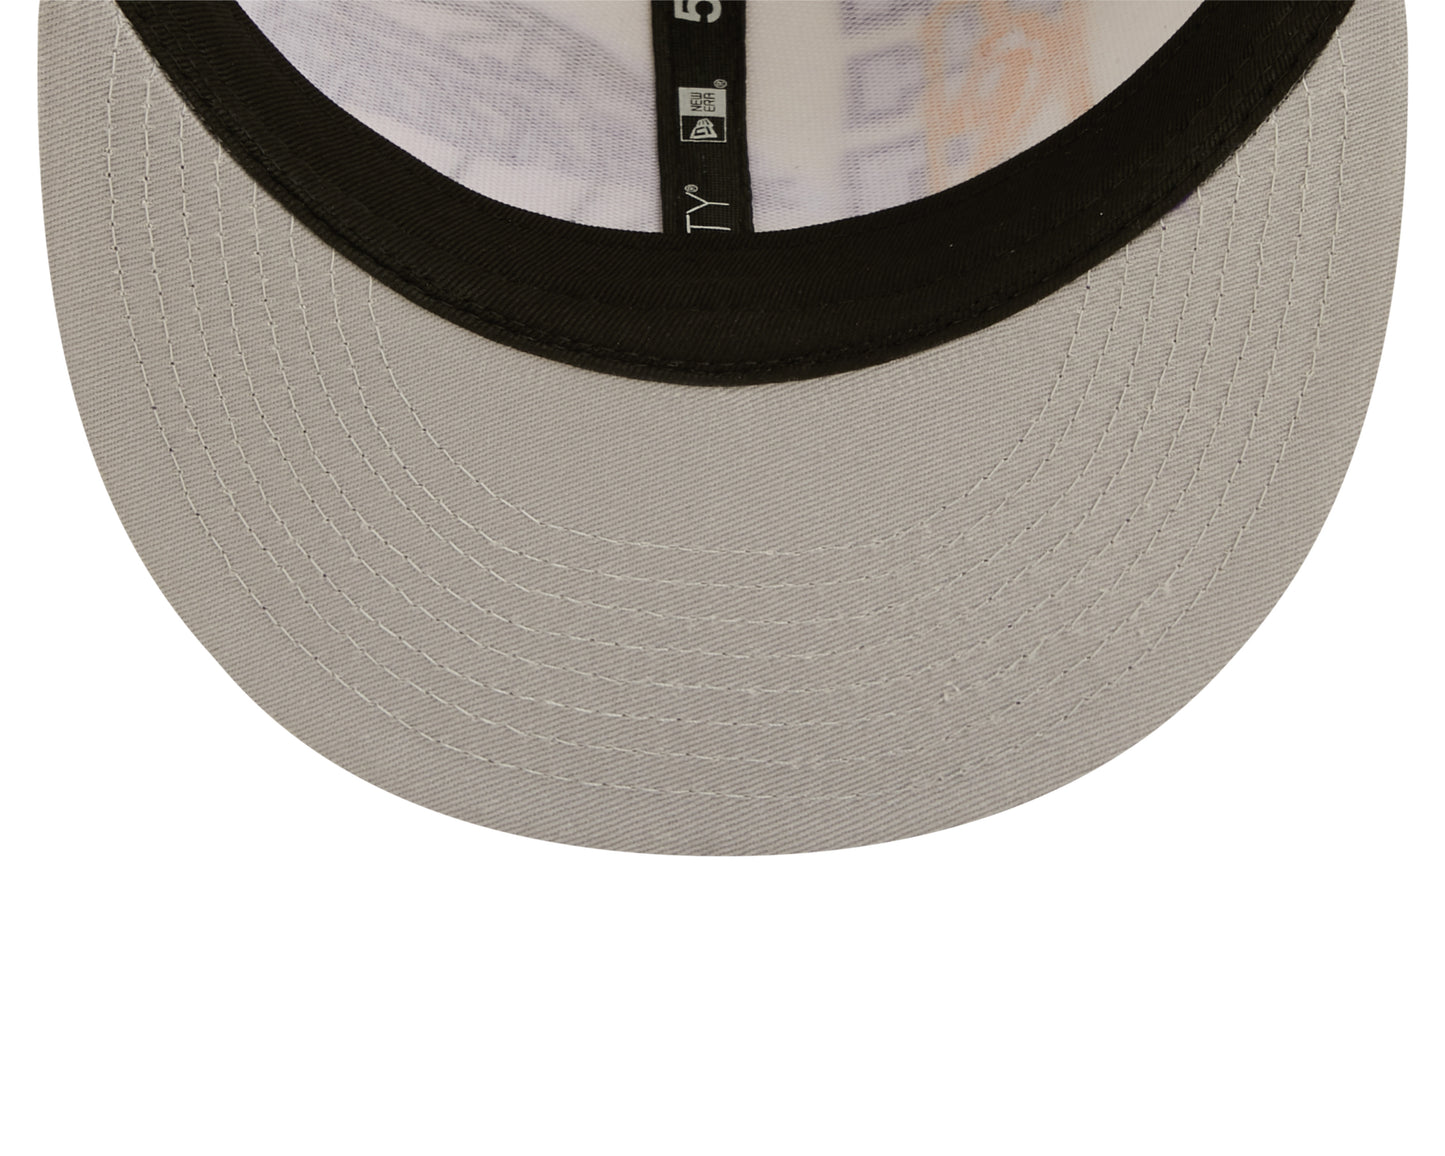 Los Angeles Lakers New Era  NBA On Stage Draft 59fifty Fitted Hat- Cream